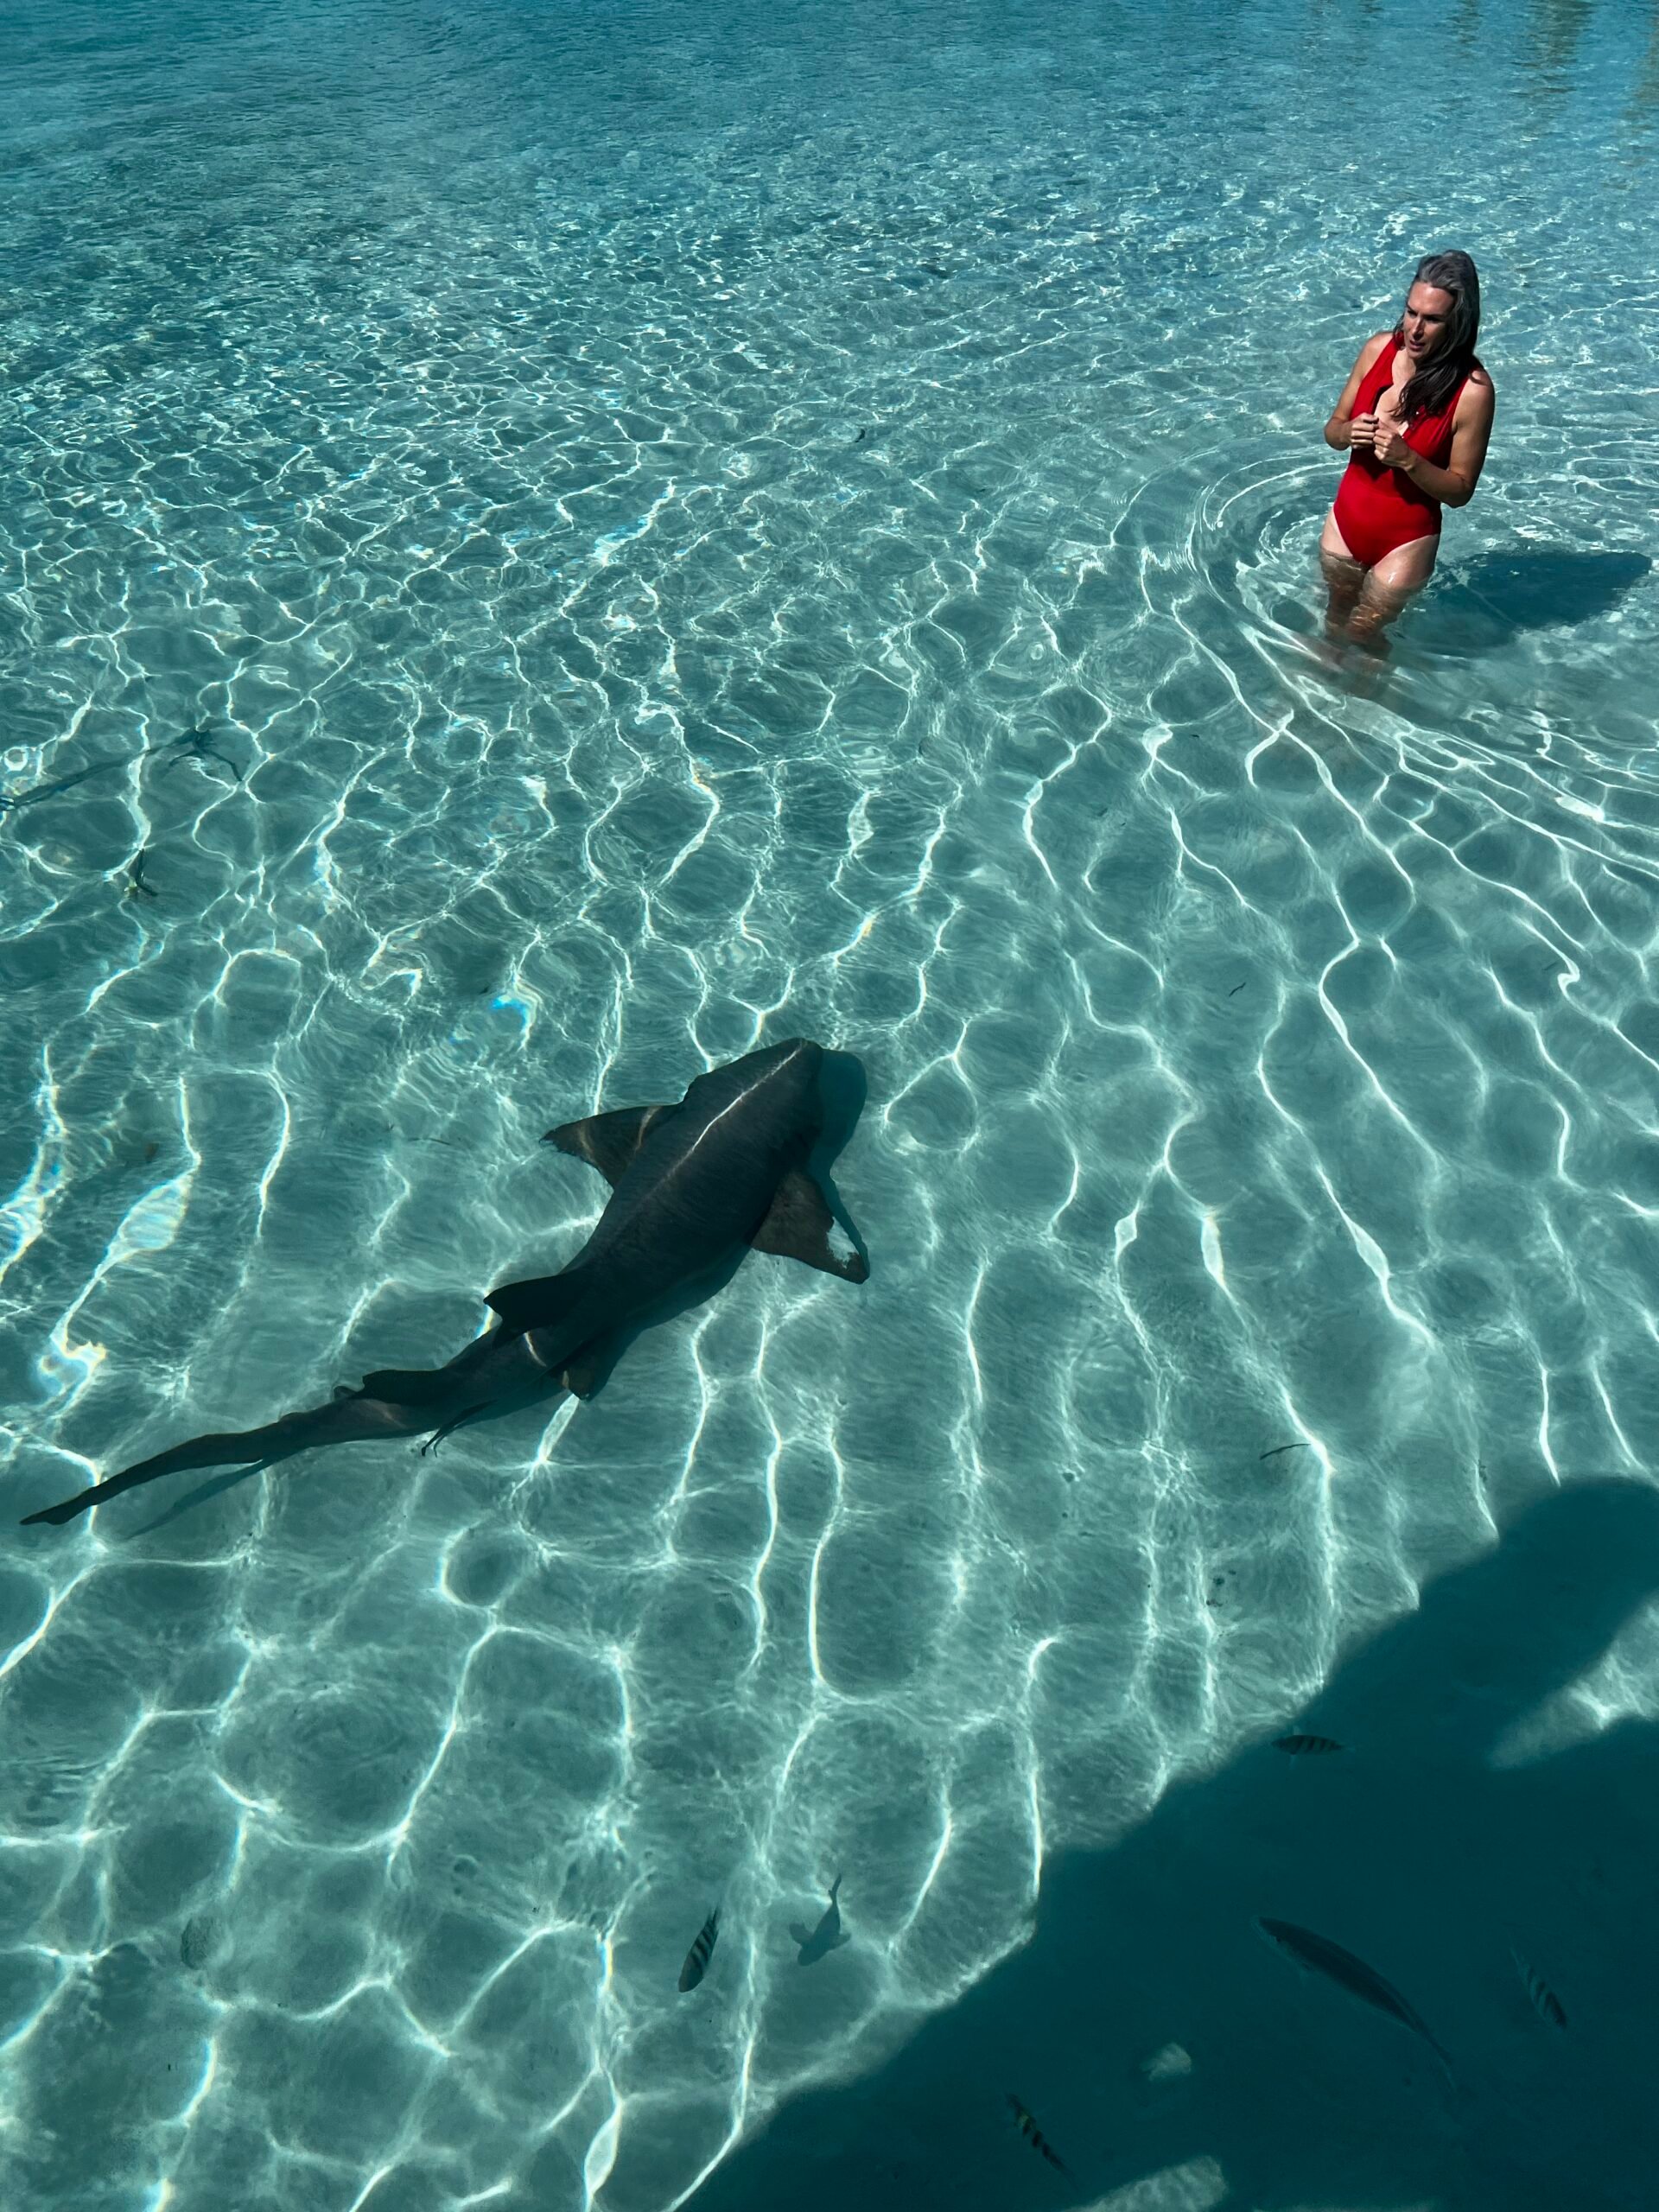 A woman in the water with a nurse shark.